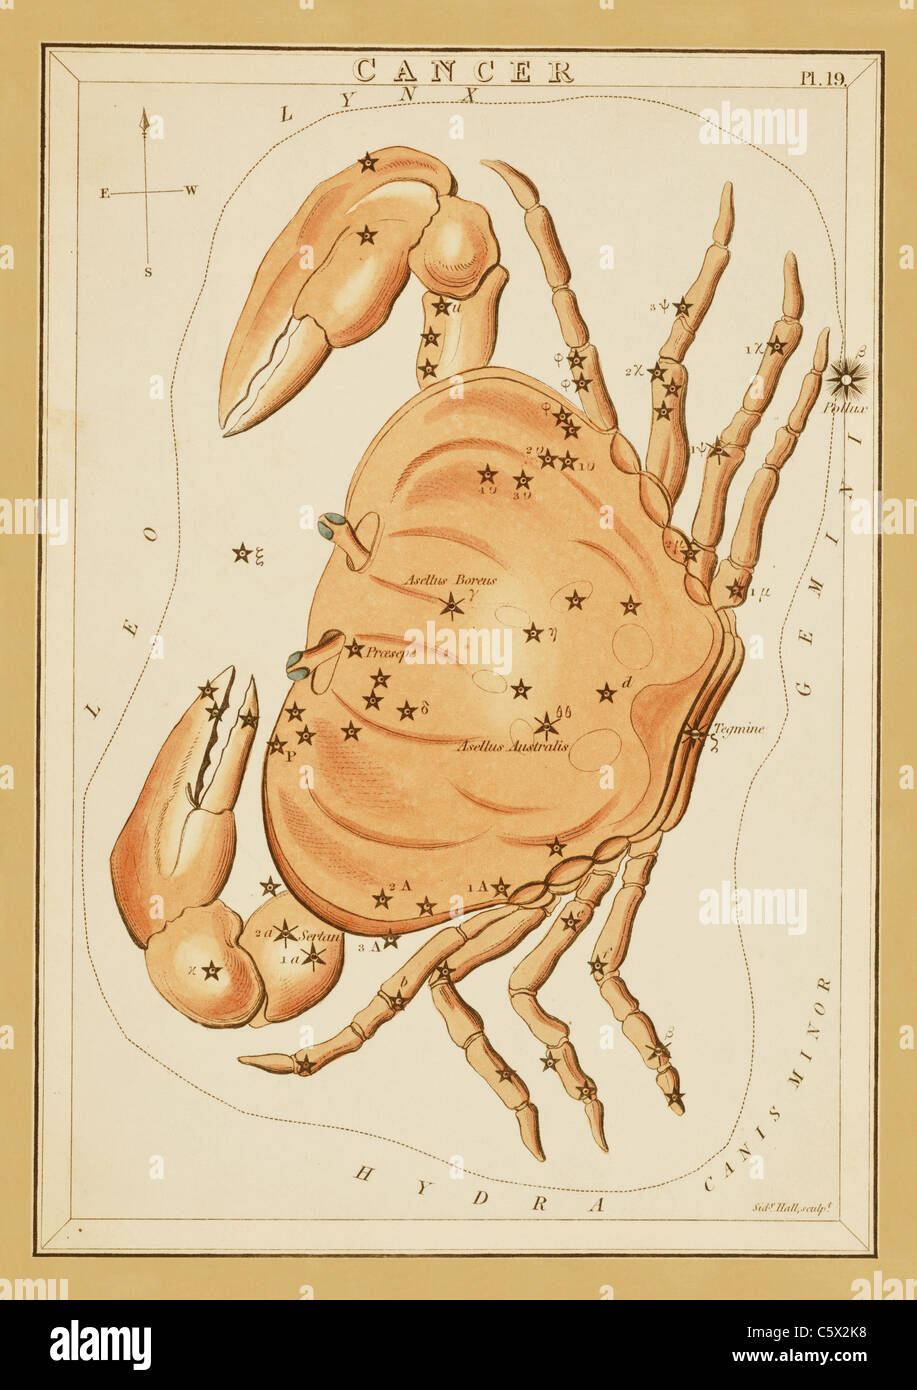 Cancer - 1825 Astronomical Chart Stock Photo